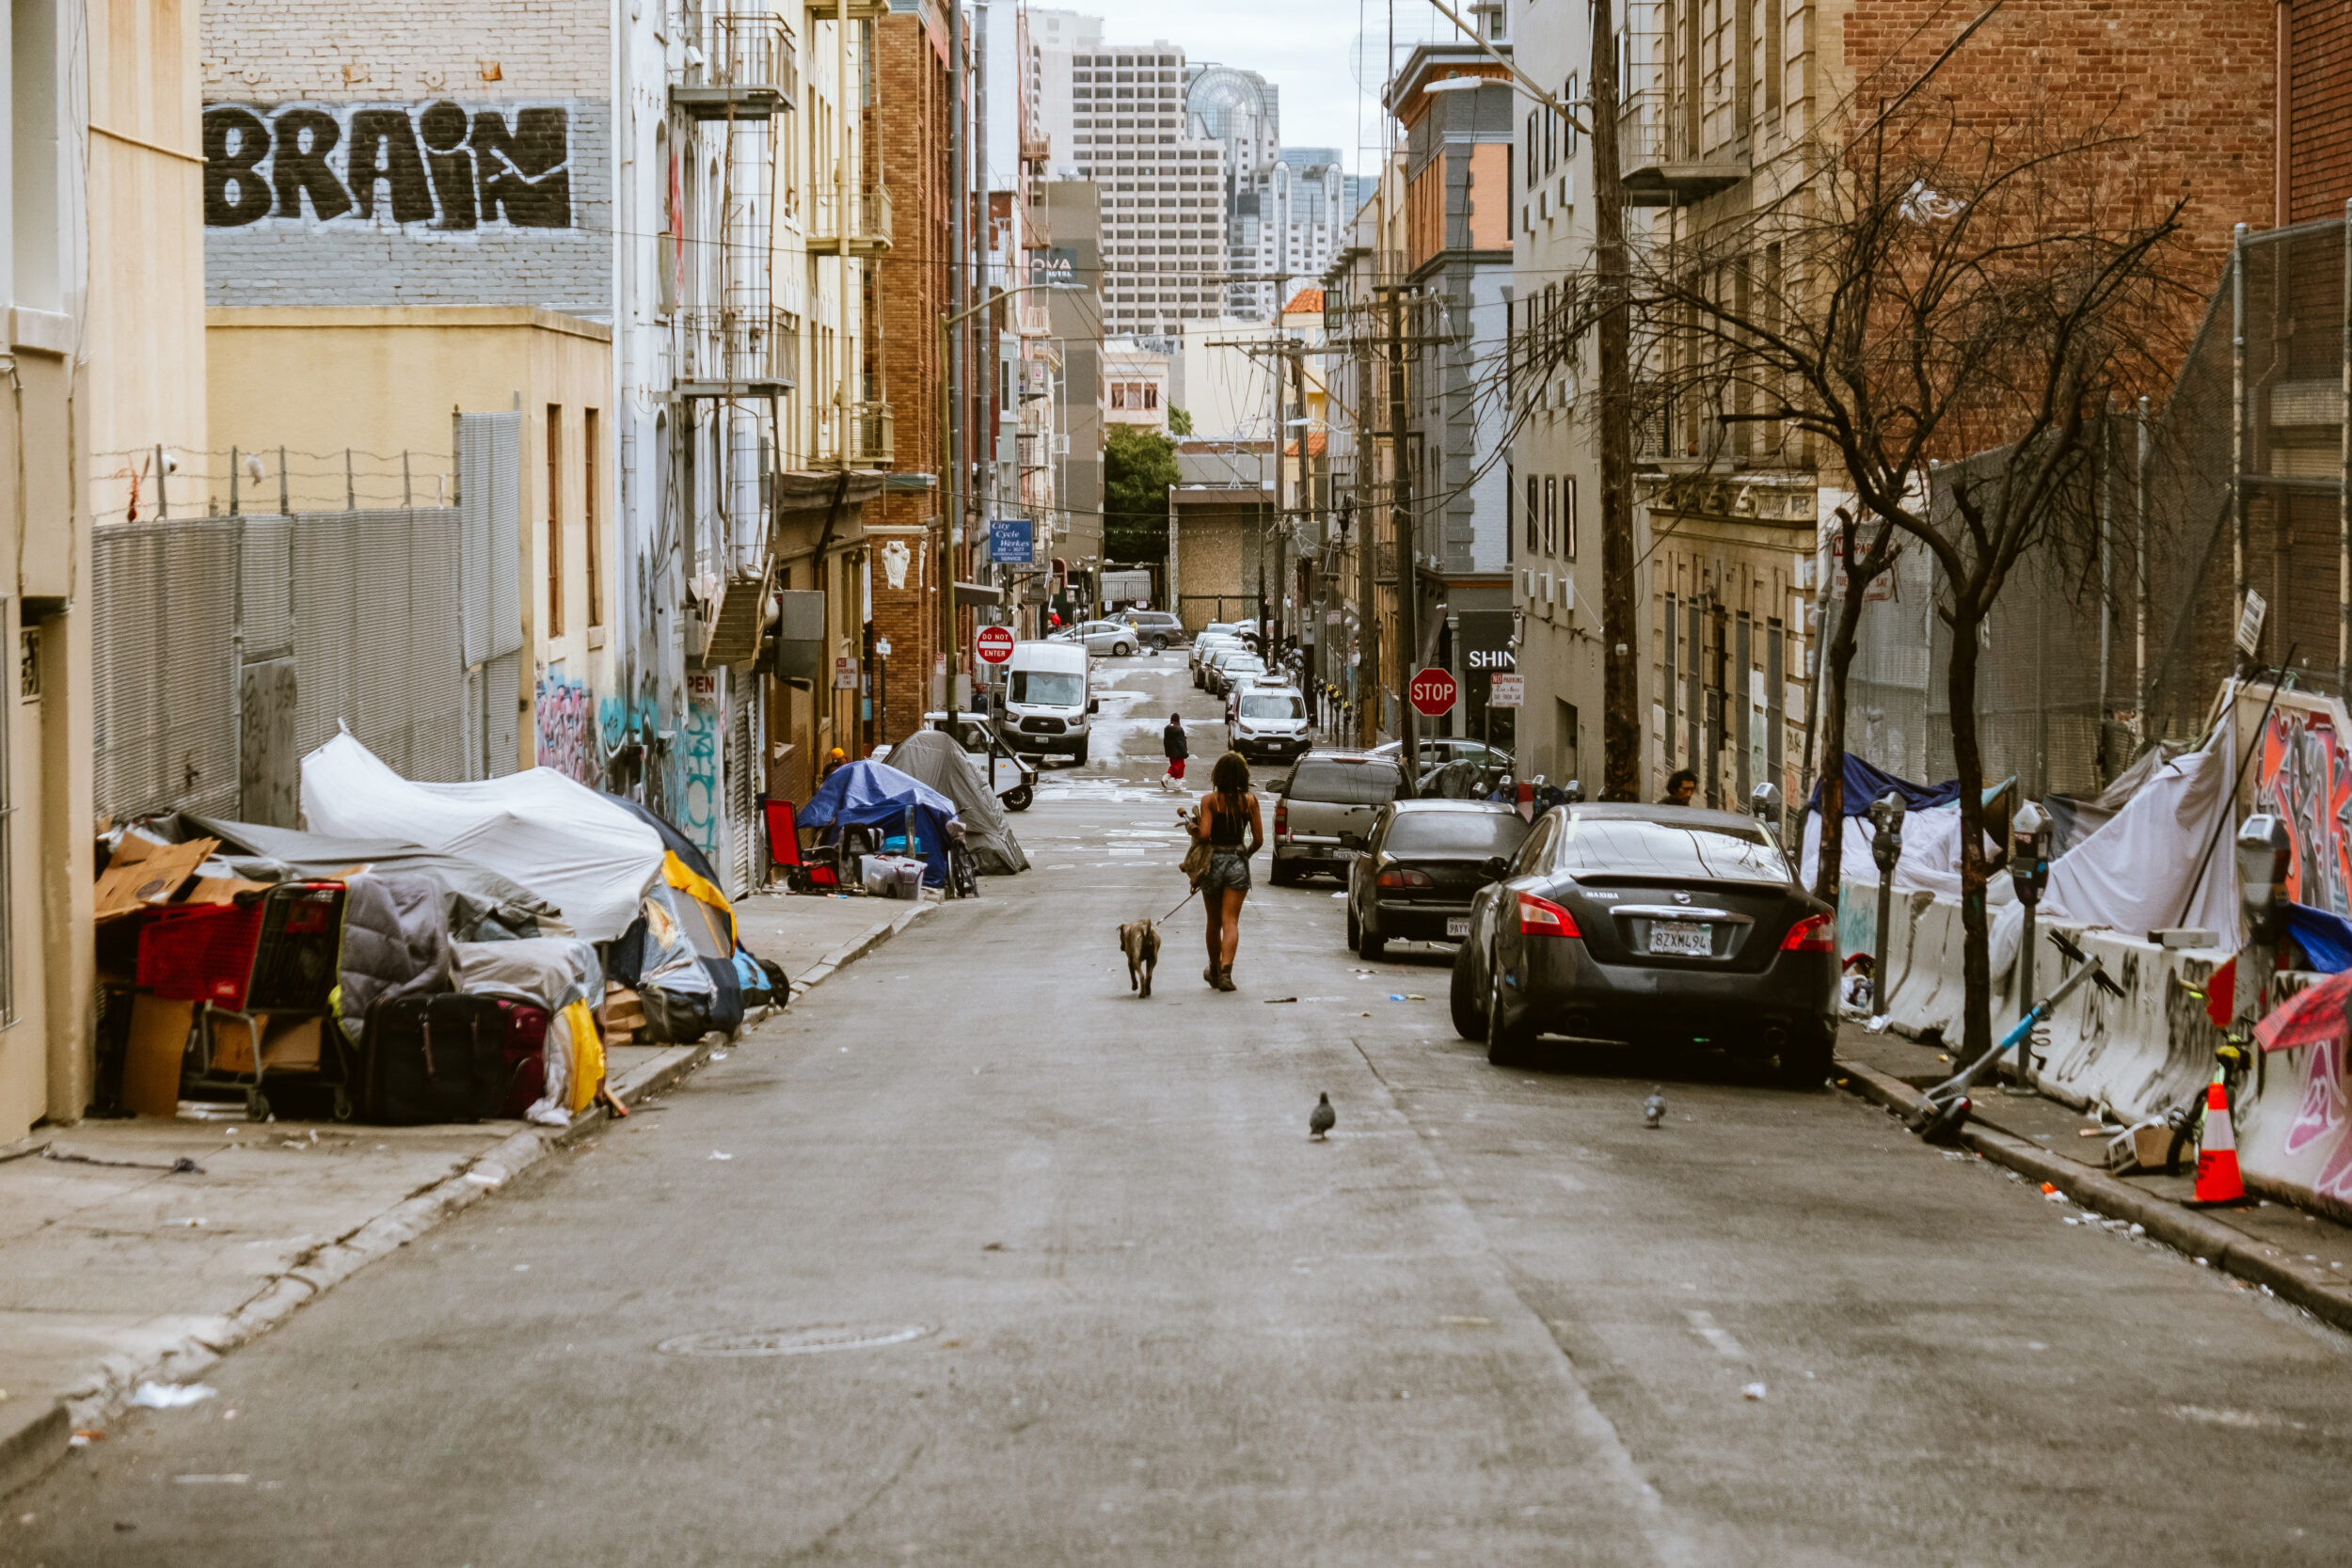 A city alley with tents, debris, a person walking a dog, cars, and distant buildings.